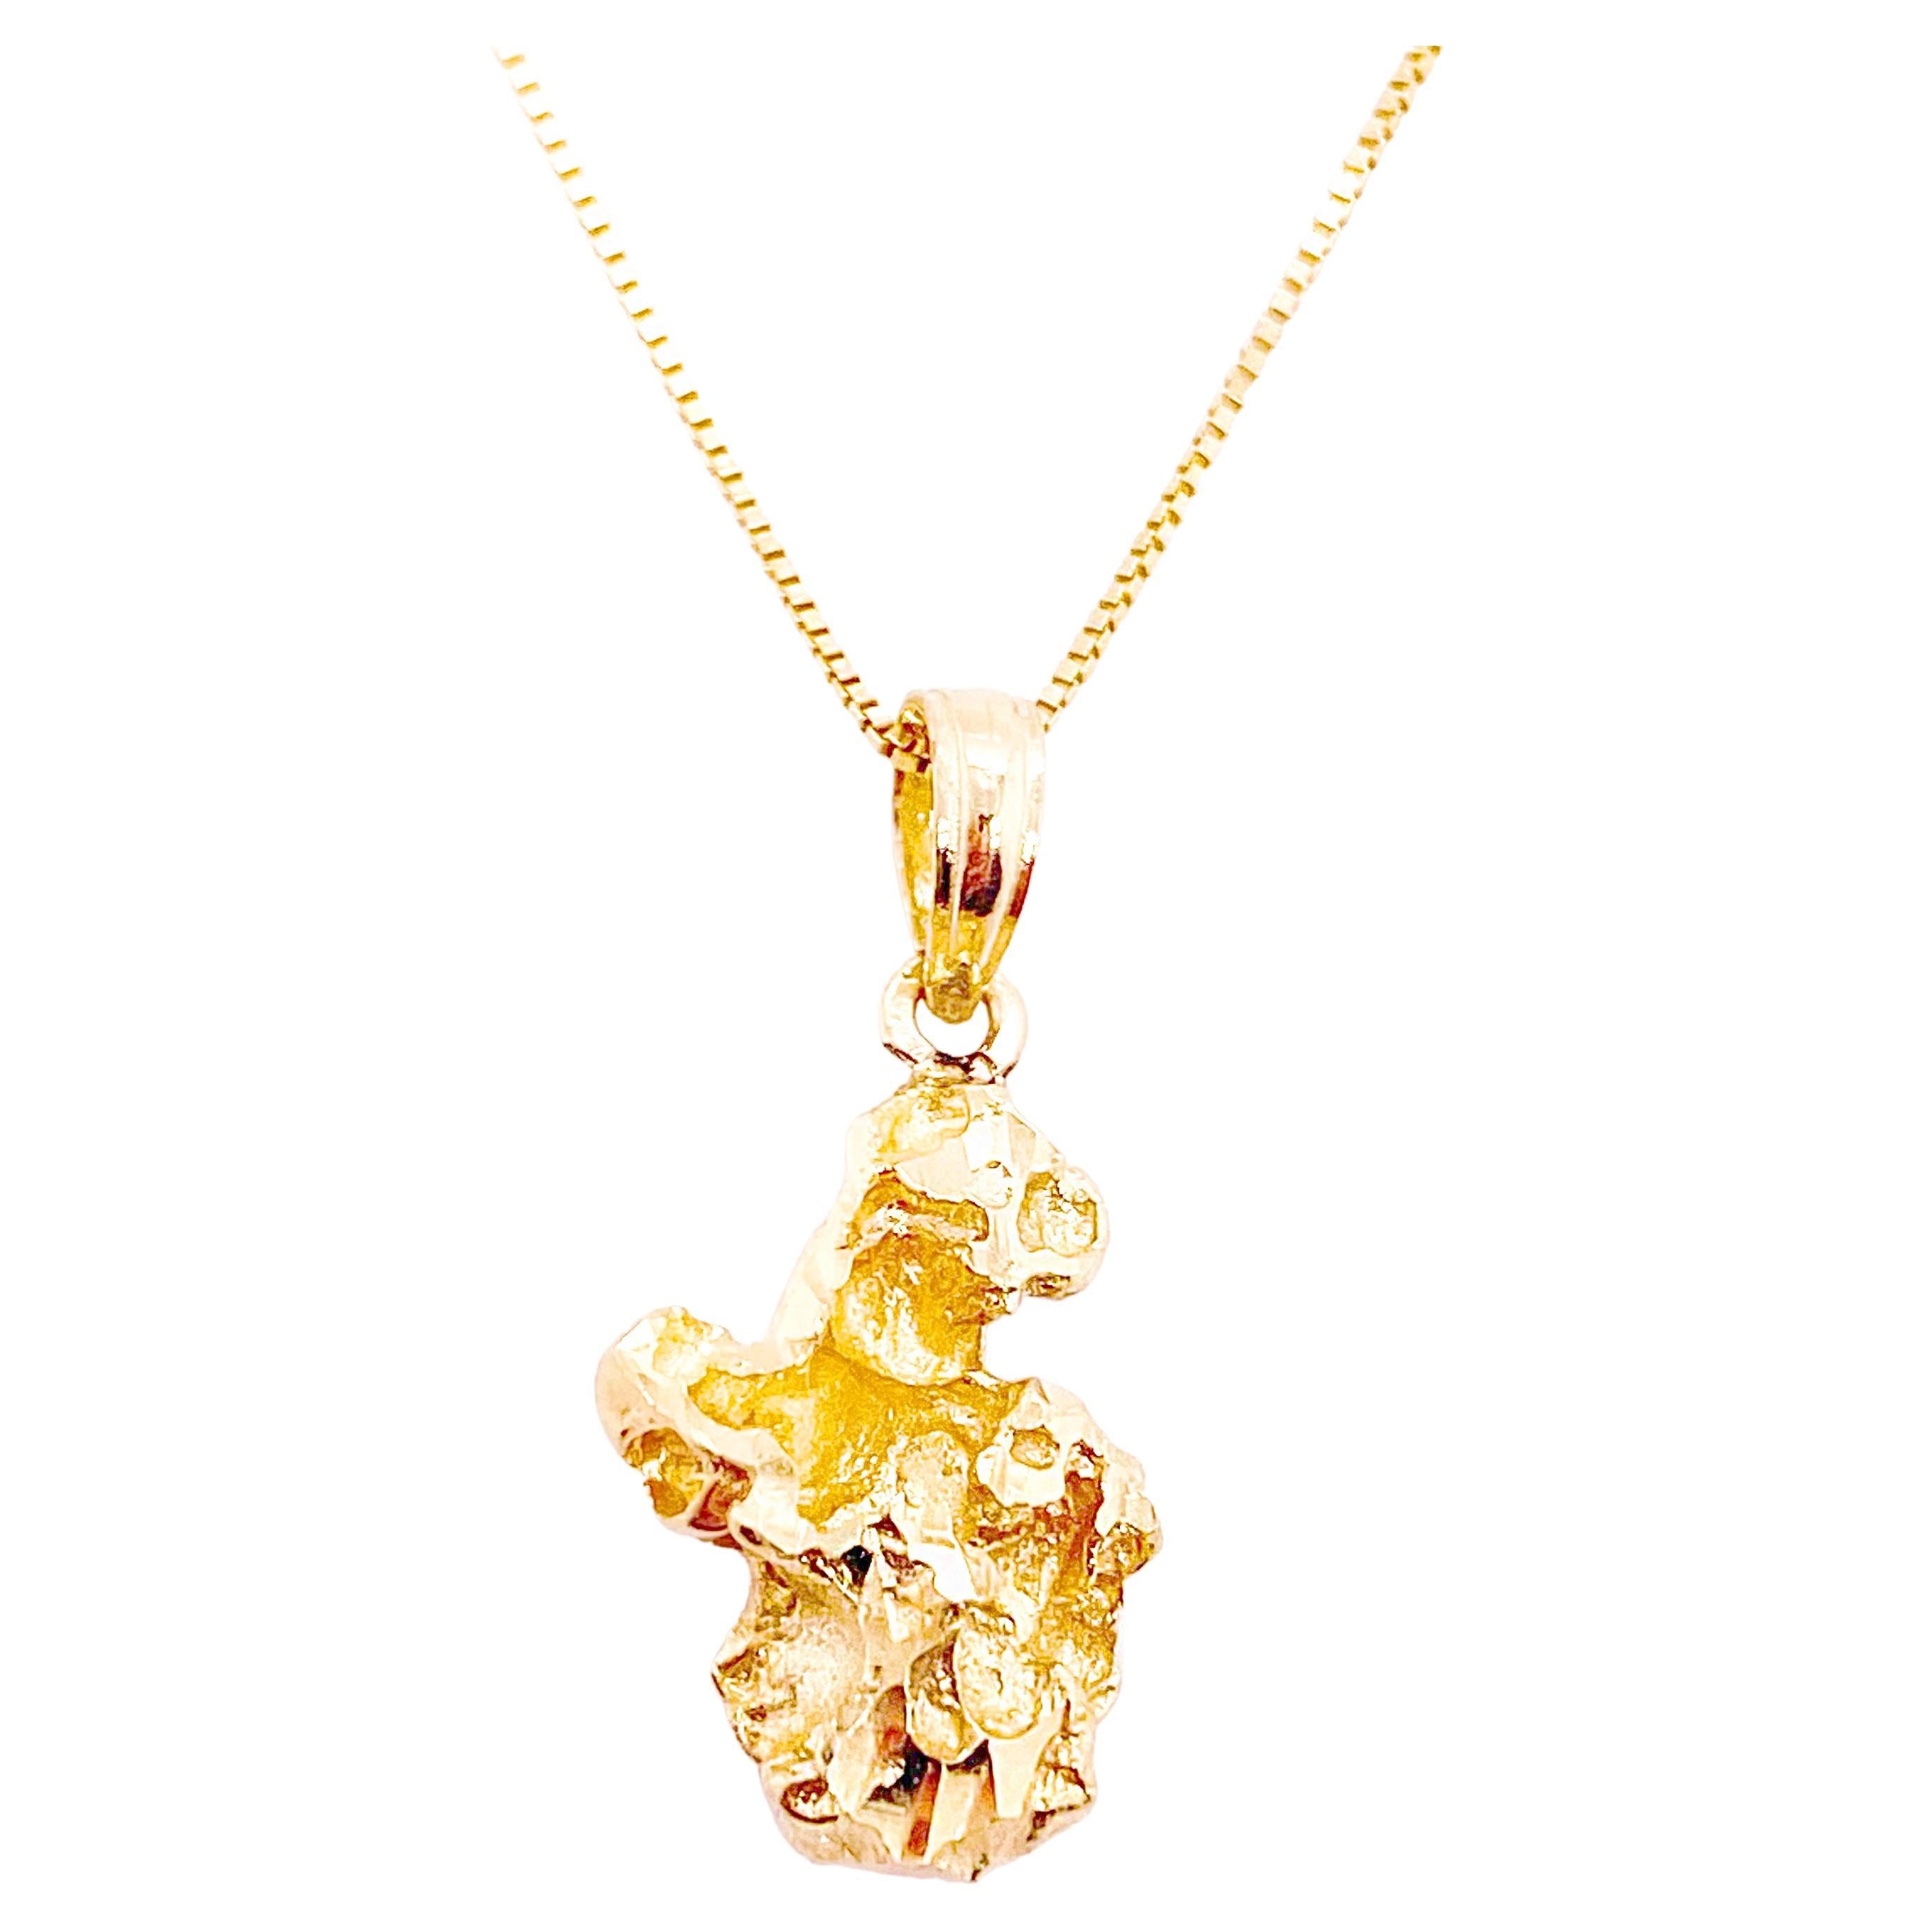 Dainty Nugget Pendant W Box Chain in 14k Yellow Gold, 2.6 Grams